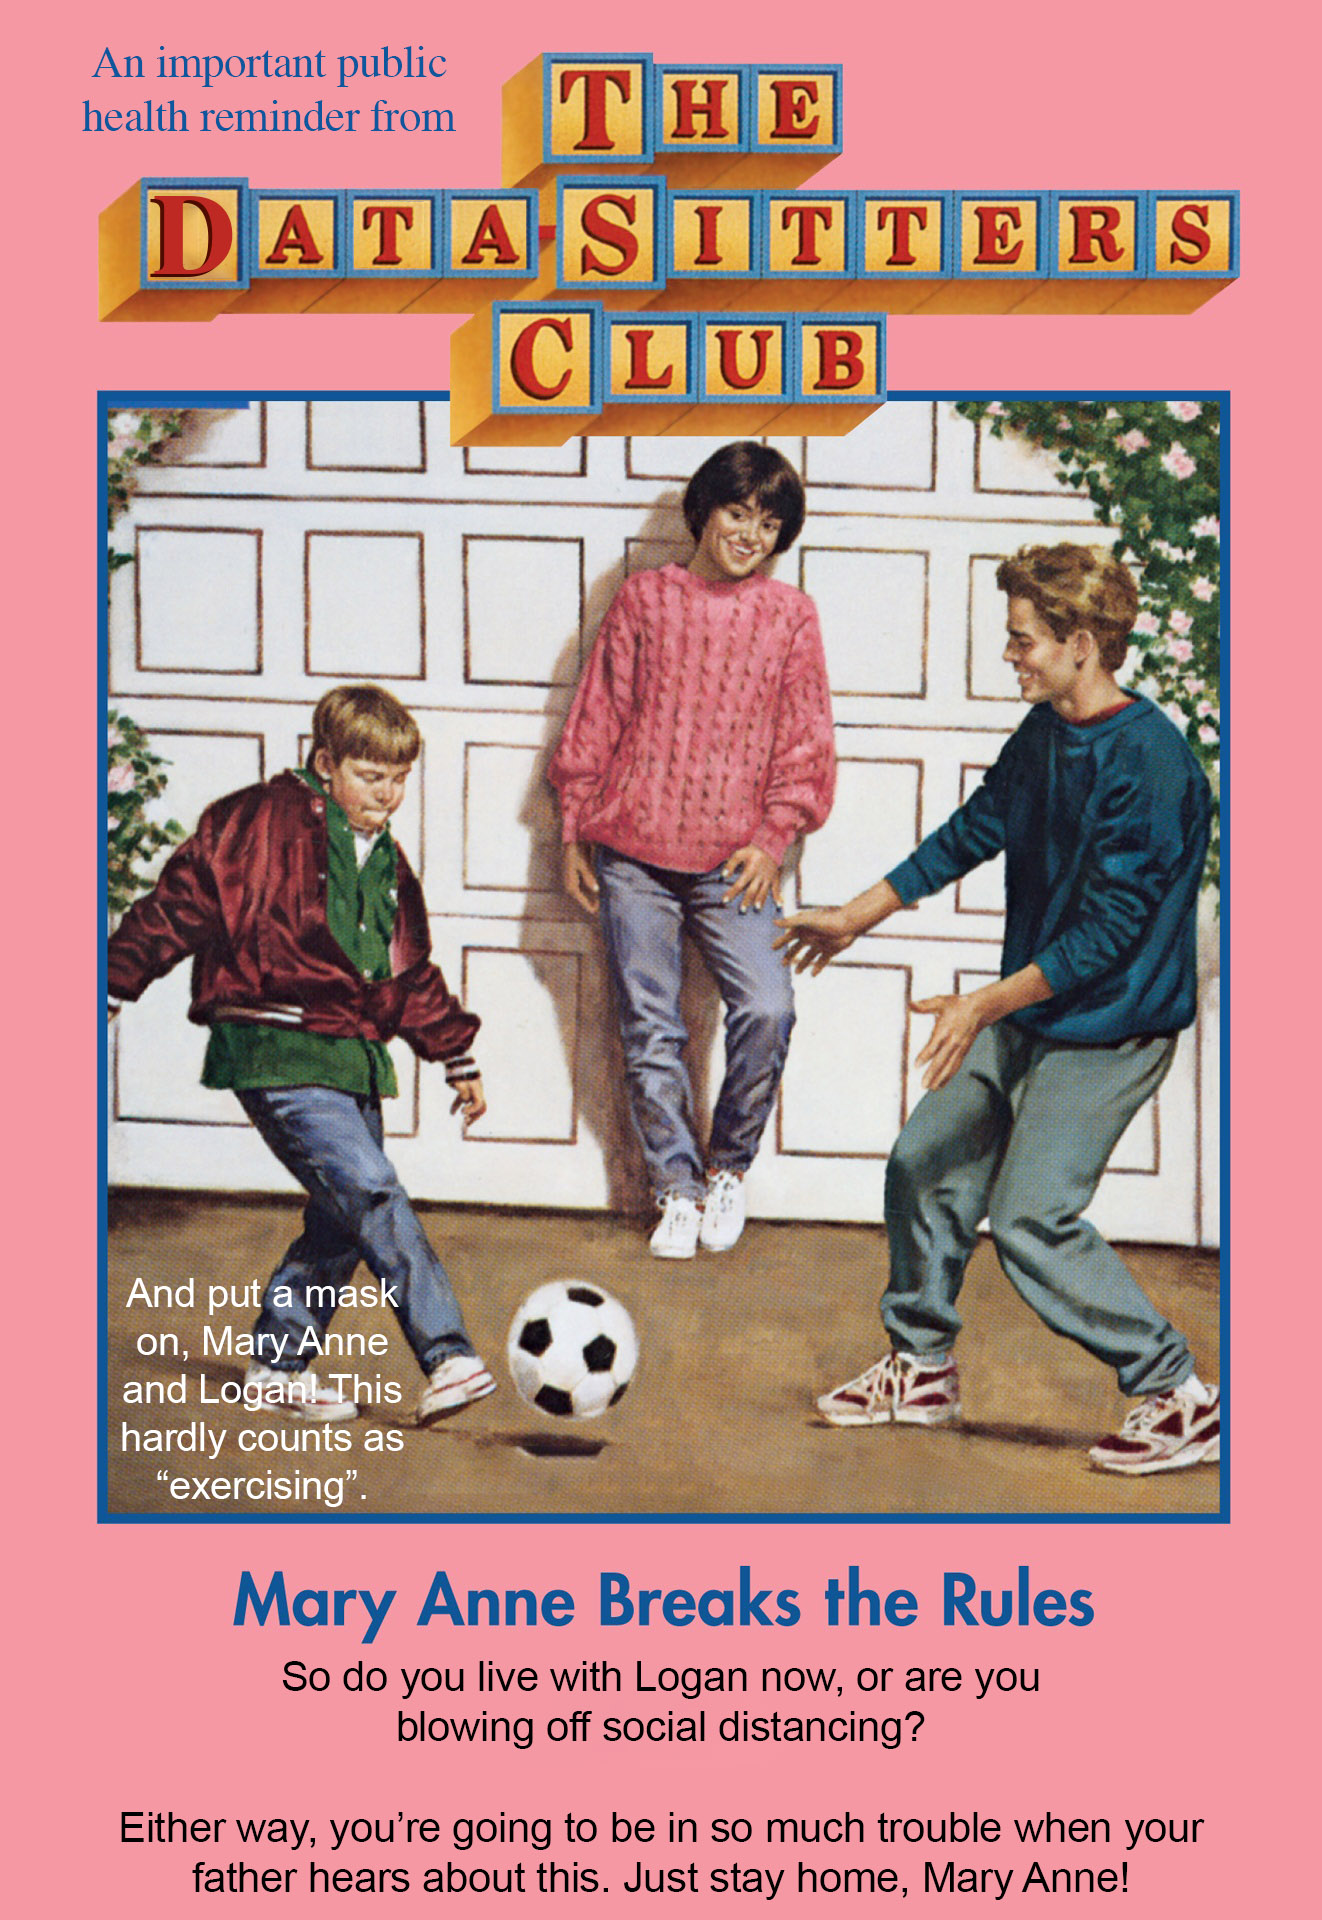 Quit breaking all the rules, Mary Anne!